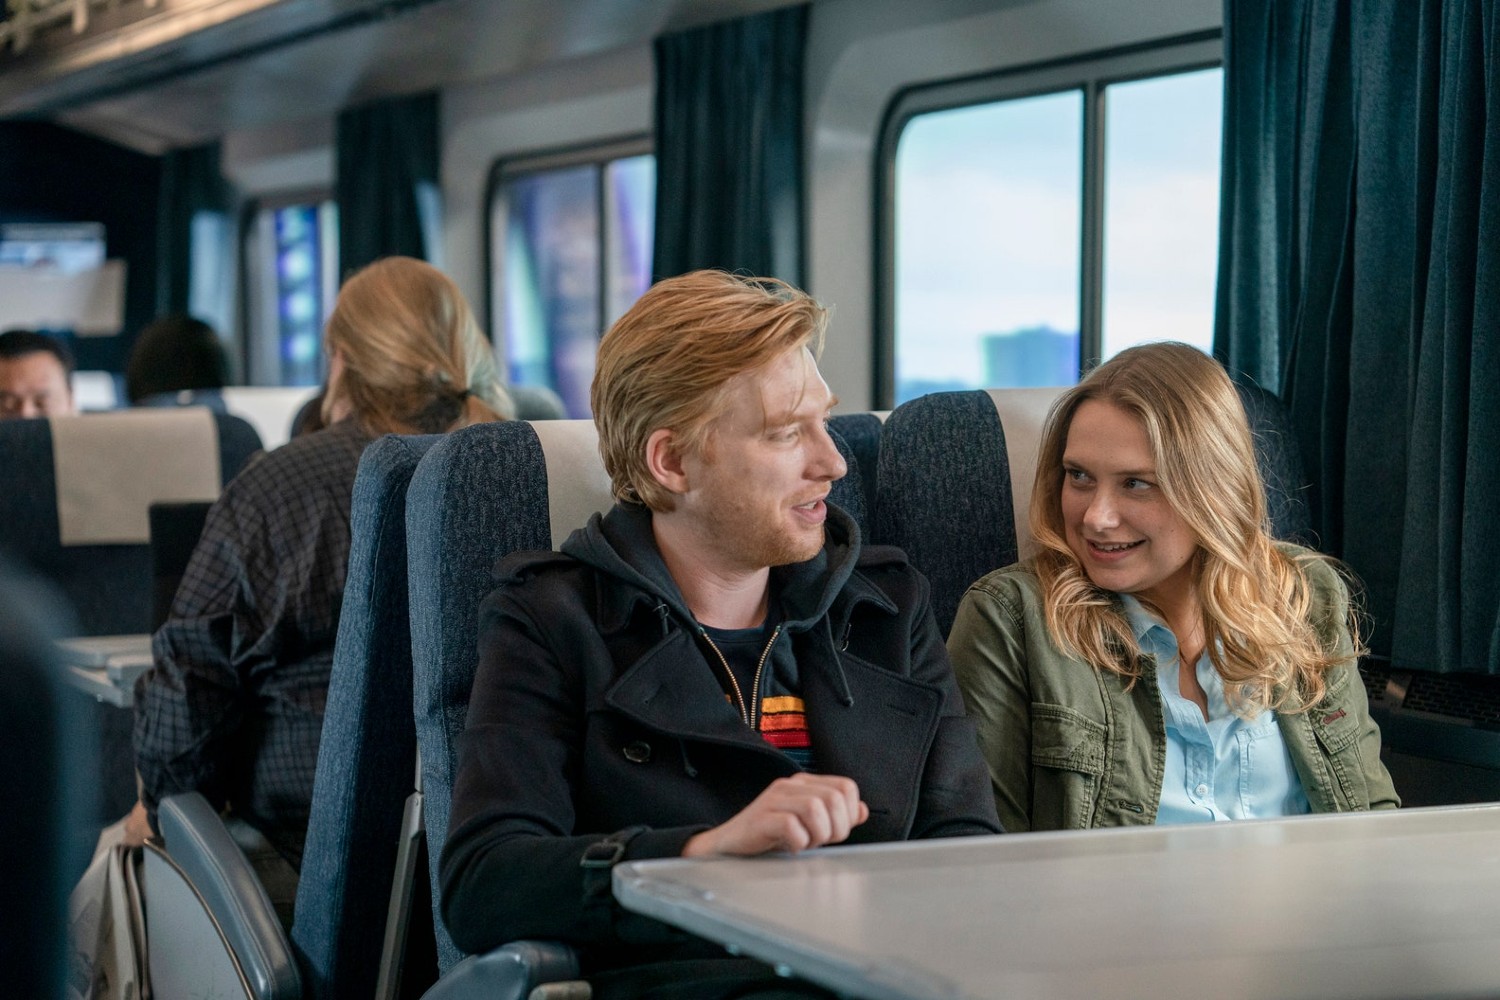 Domnhall Gleeson as Billy and Merritt Wever as Ruby sitting on a train in HBO series Run.